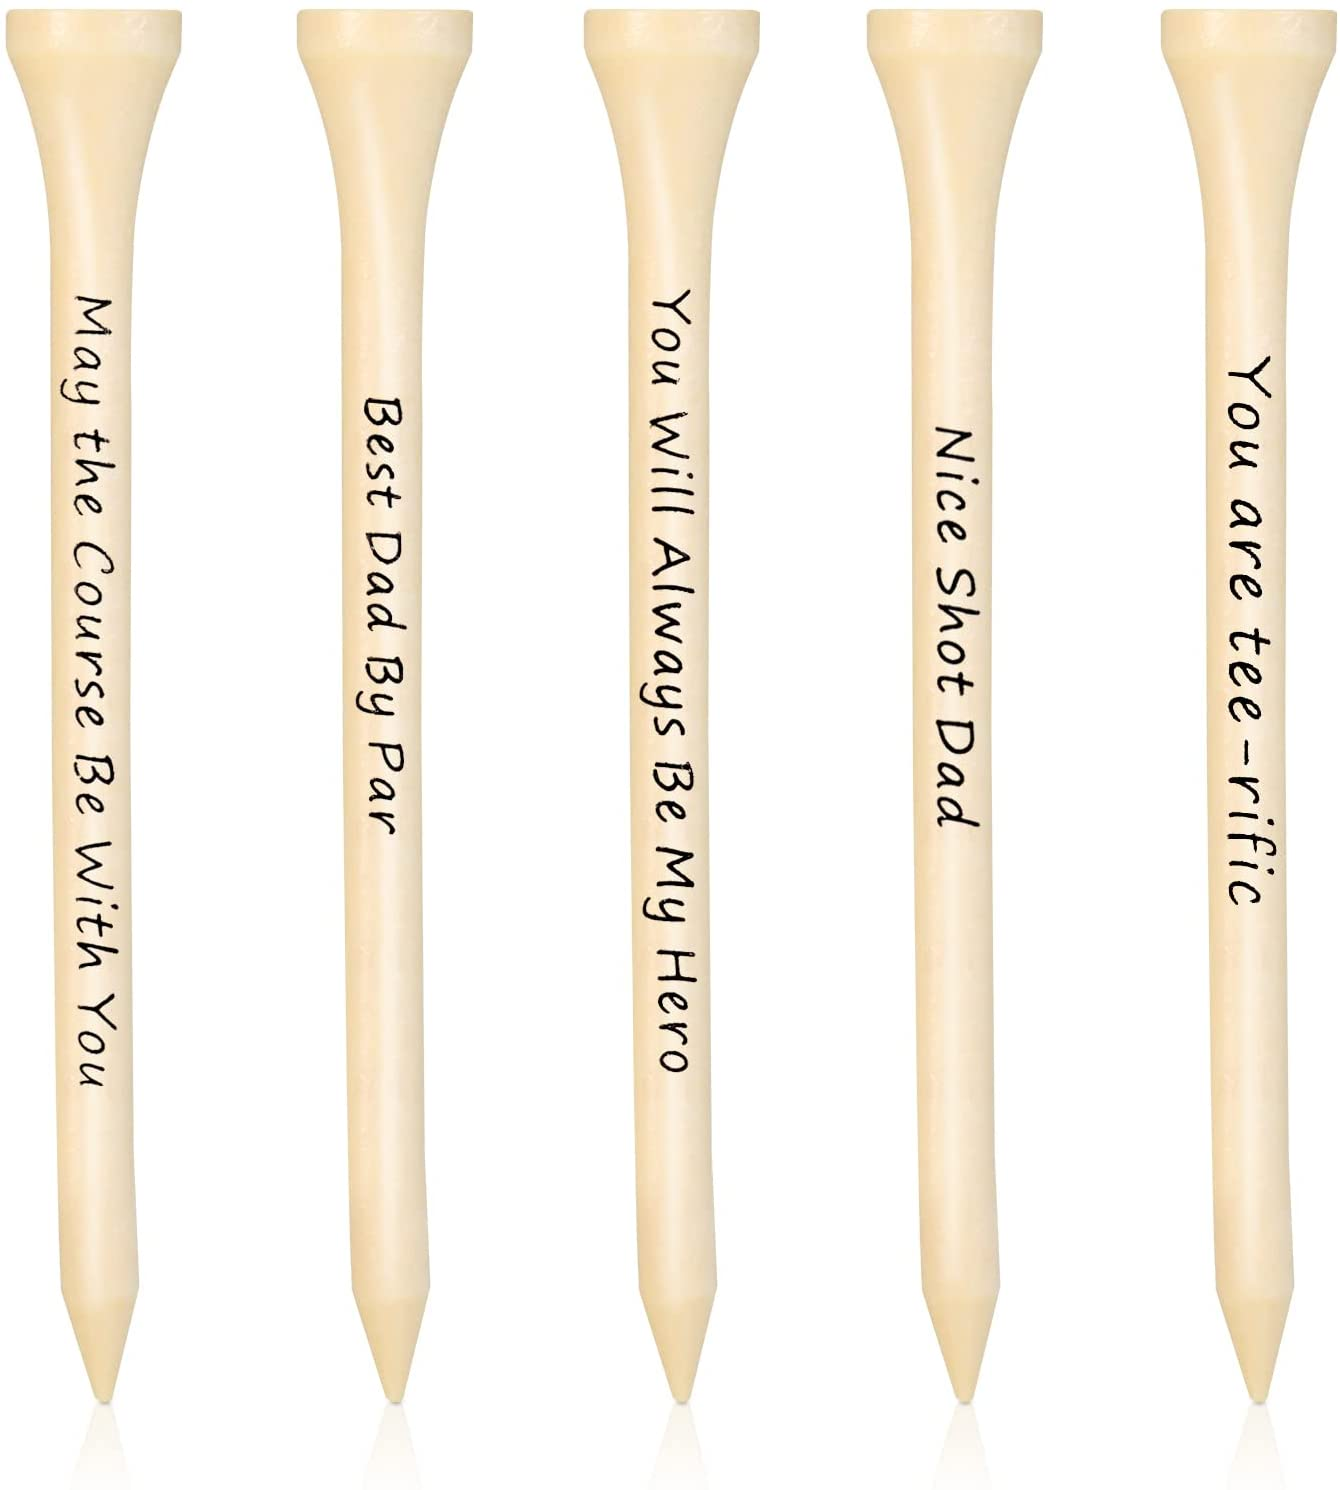 60 Pieces Dad Golf Gifts Funny Sayings Golf Tees, 3-1/4 Inch Personalized Wooden Golf Tees with Warm Words